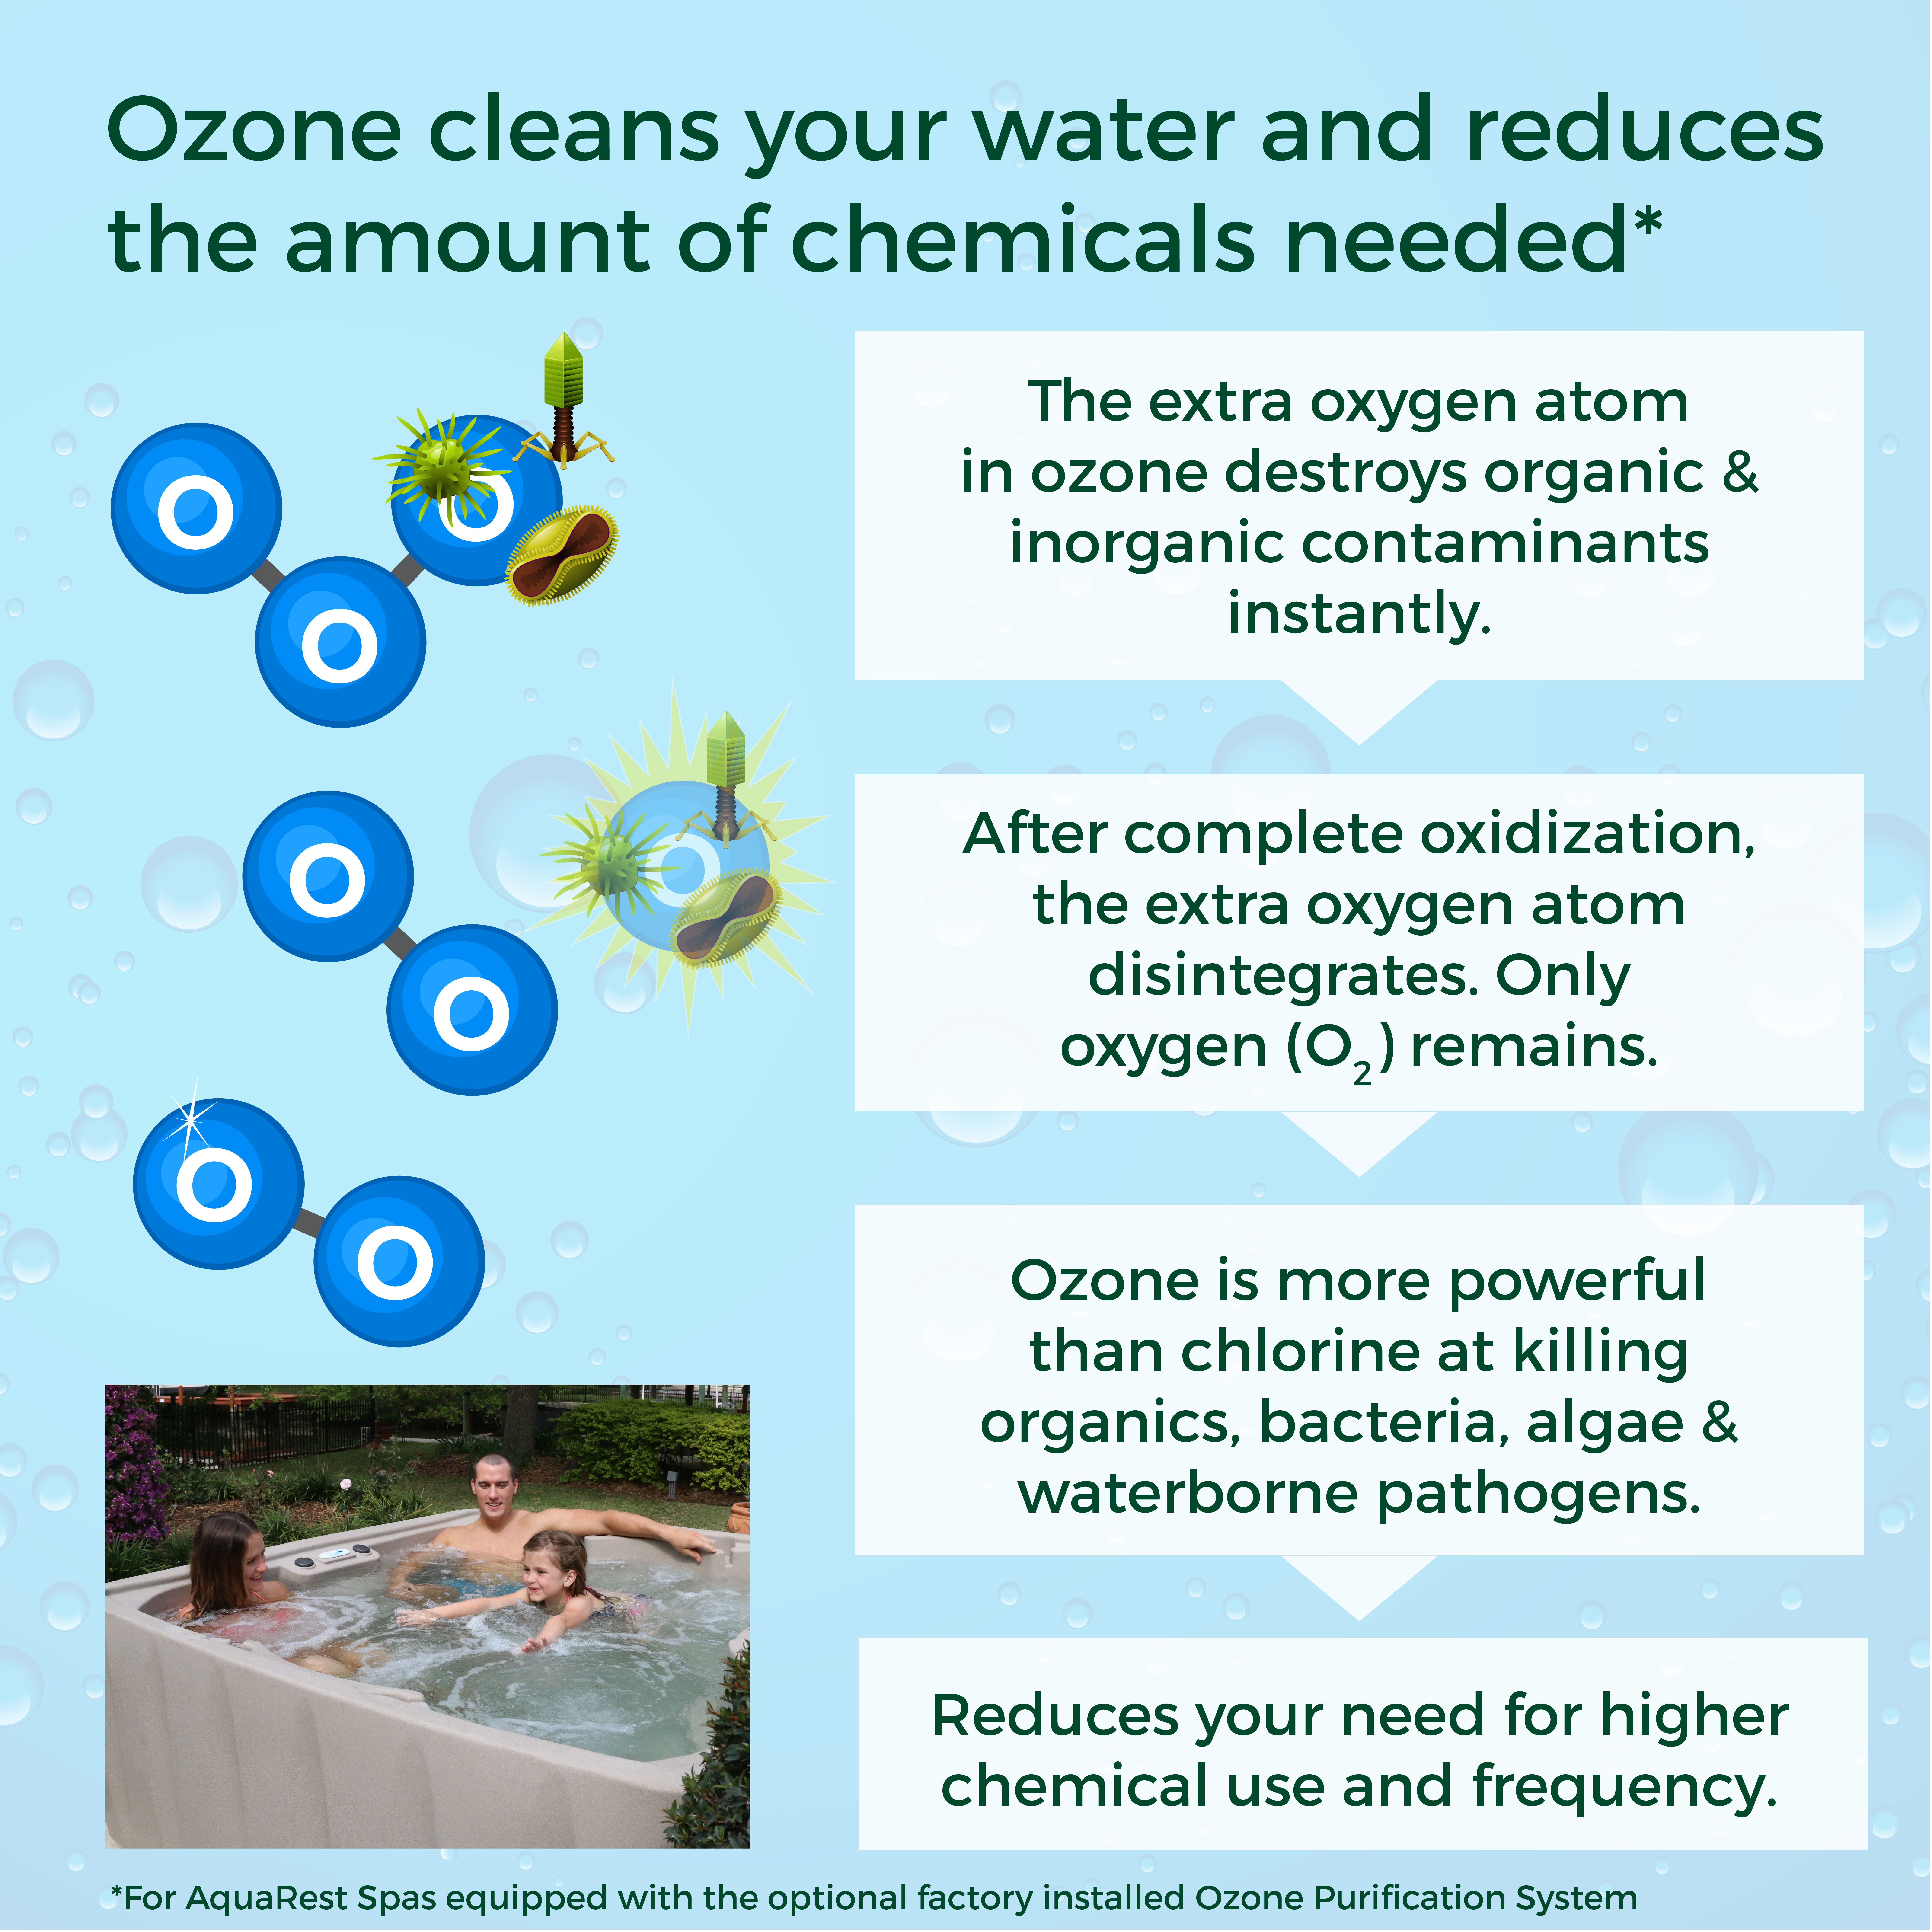 Ozone to Keep Your Water Crystal Clear, Clean and Fresh